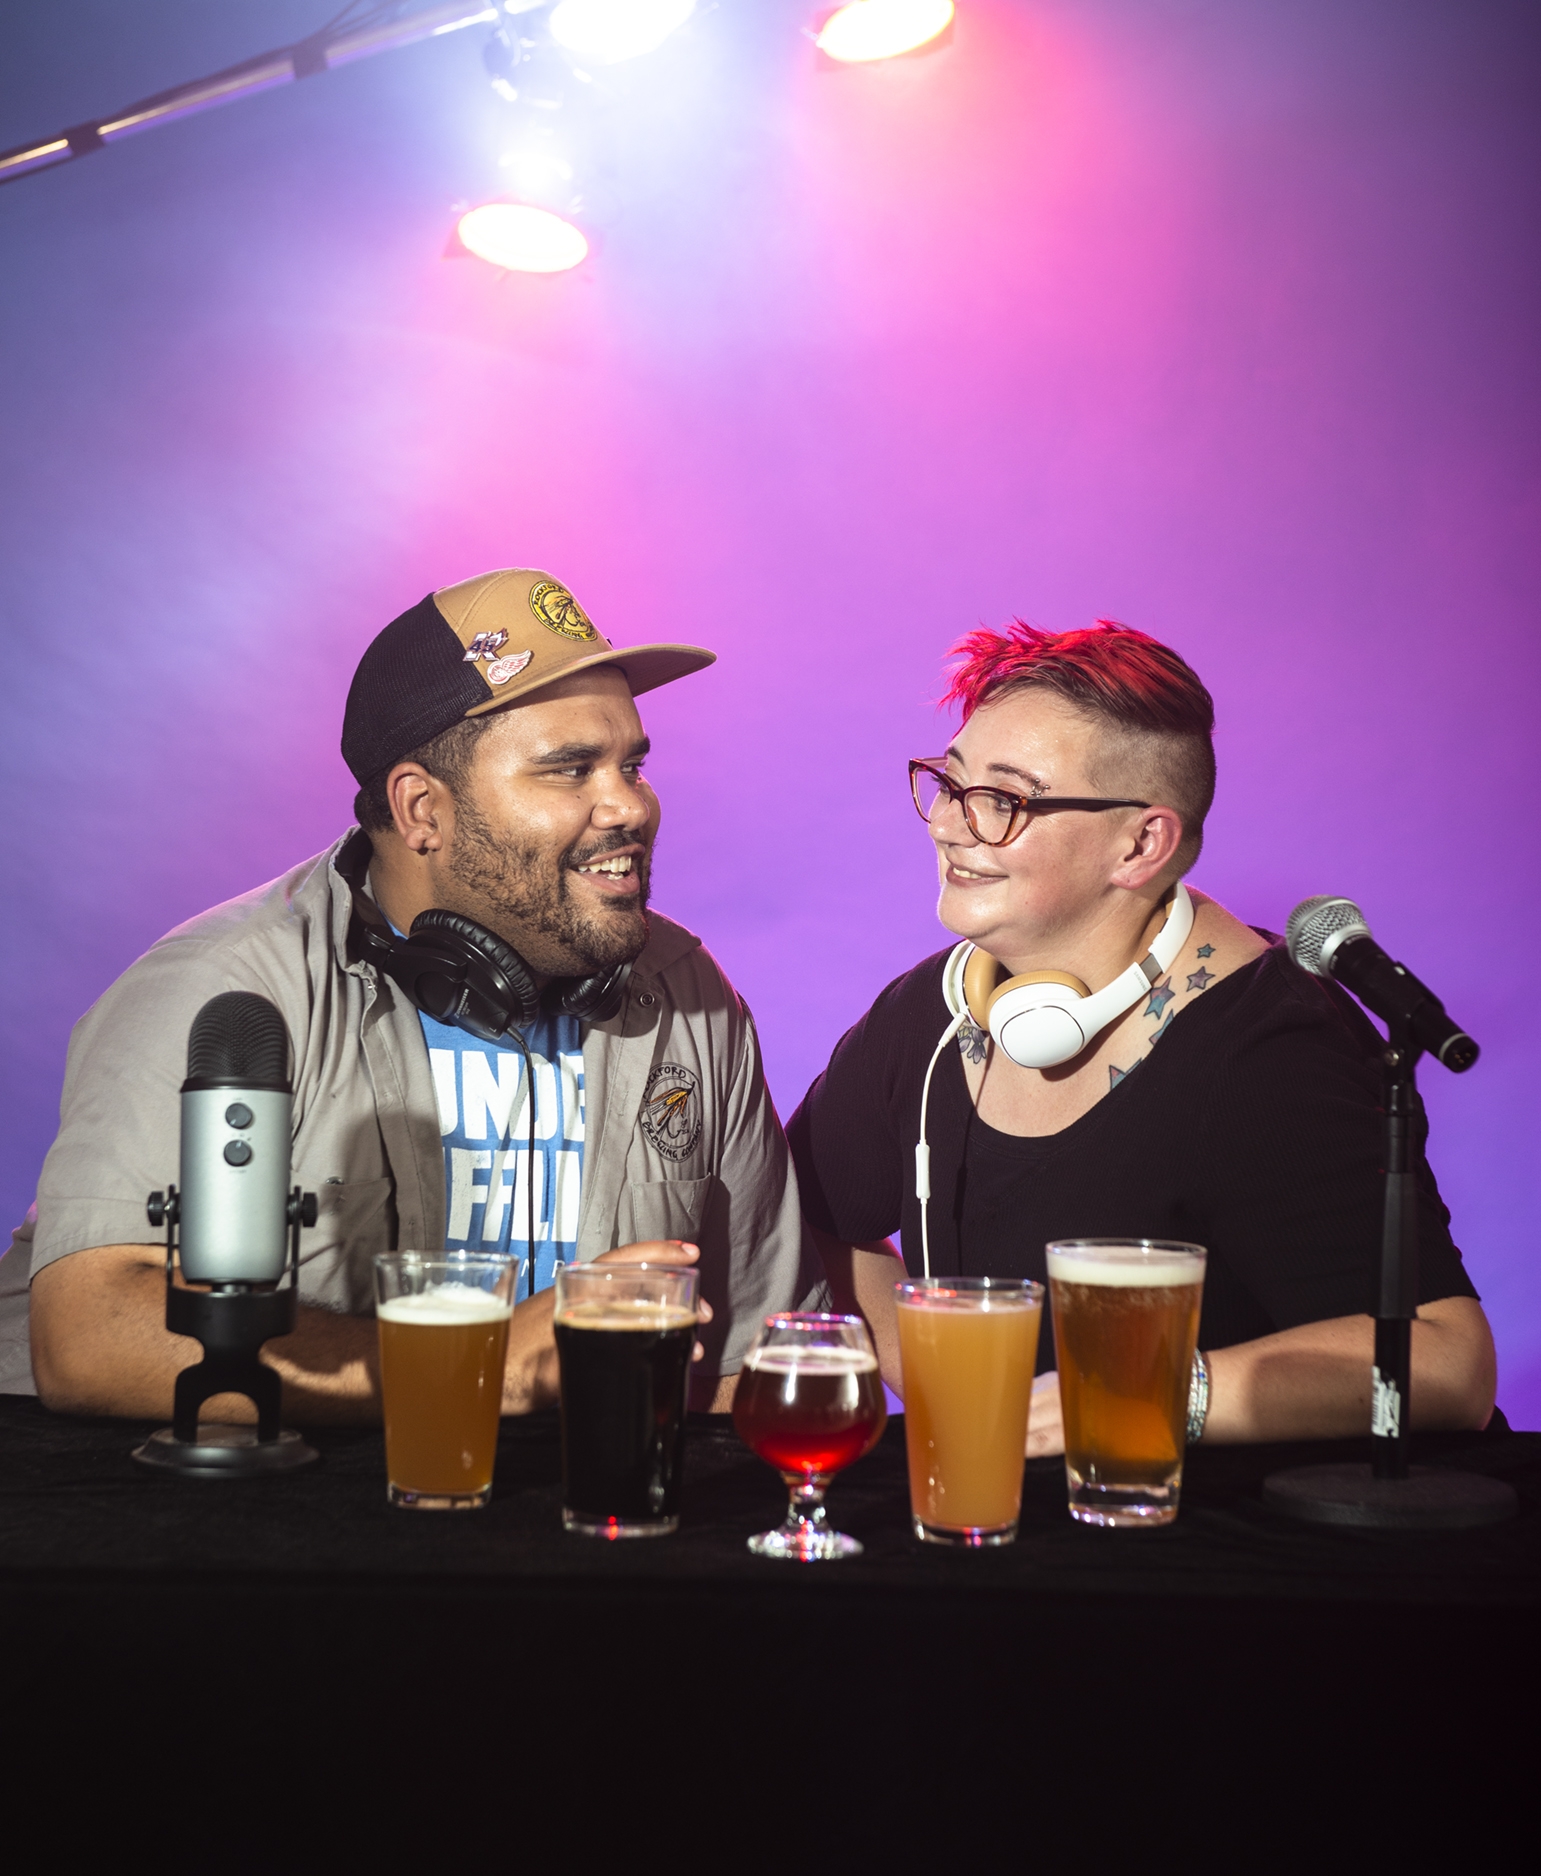 Pints With The Pros: A conversation on craft beer trends and culture with local brew gurus and podcasters